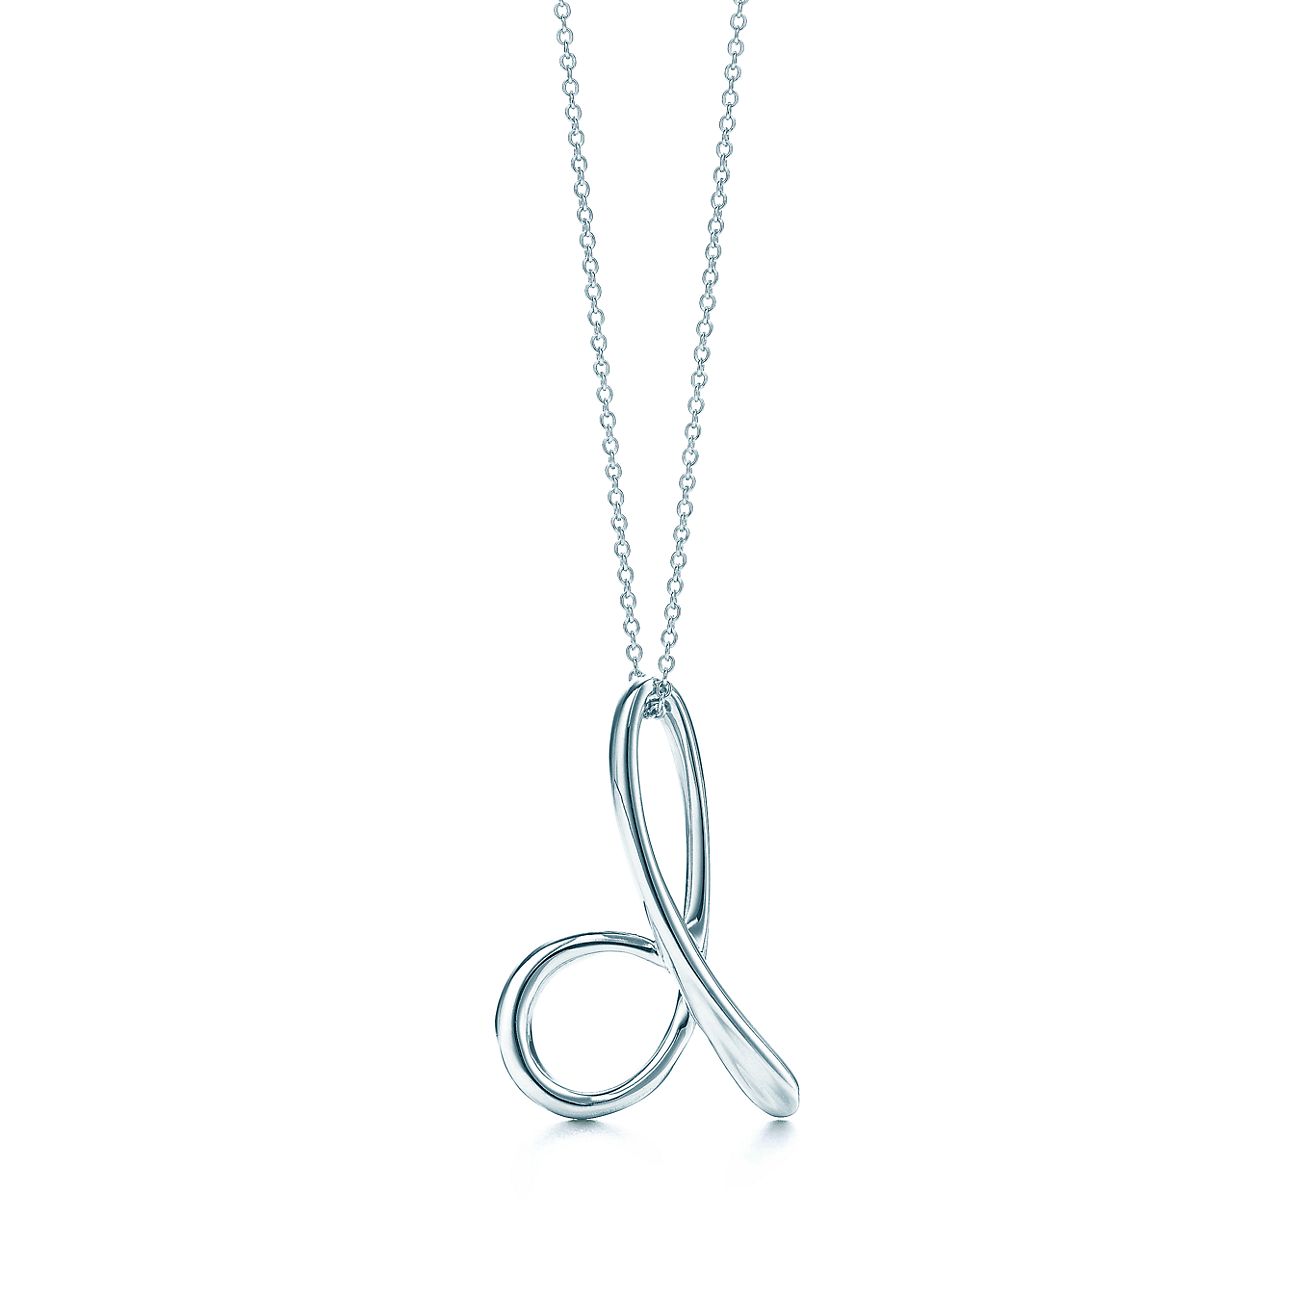 tiffany letter g necklace